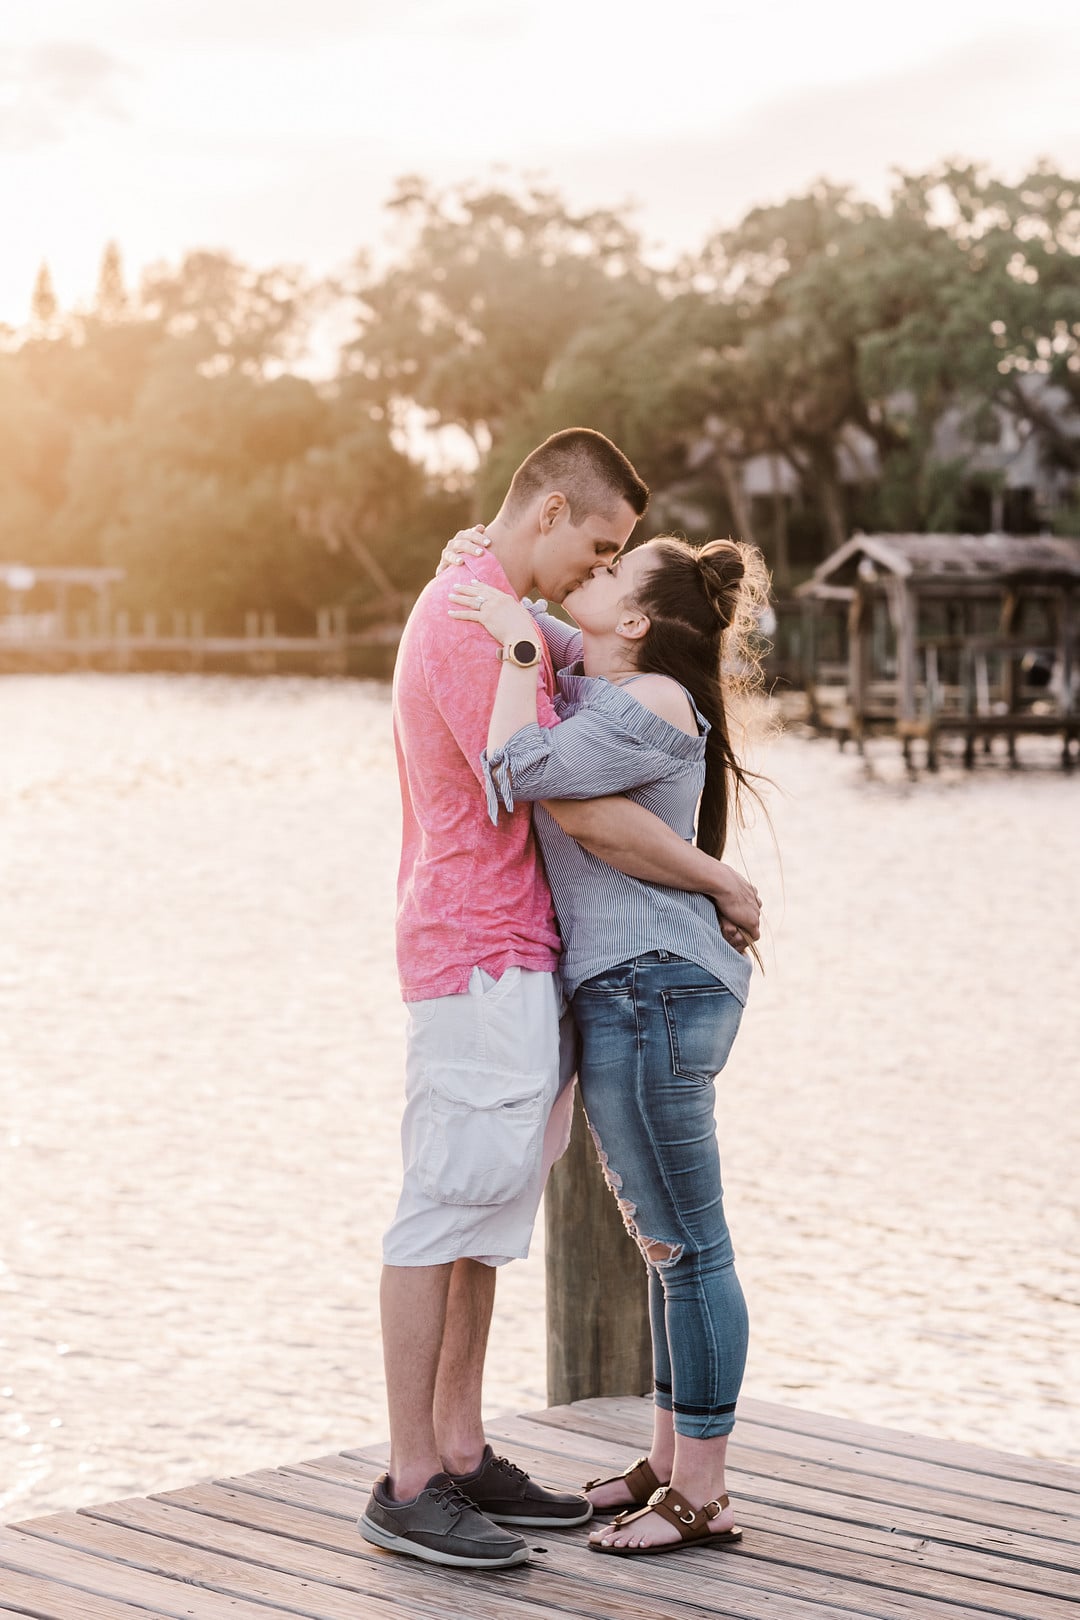 Romantic Sunset Proposal on the River in Melbourne Florida 50